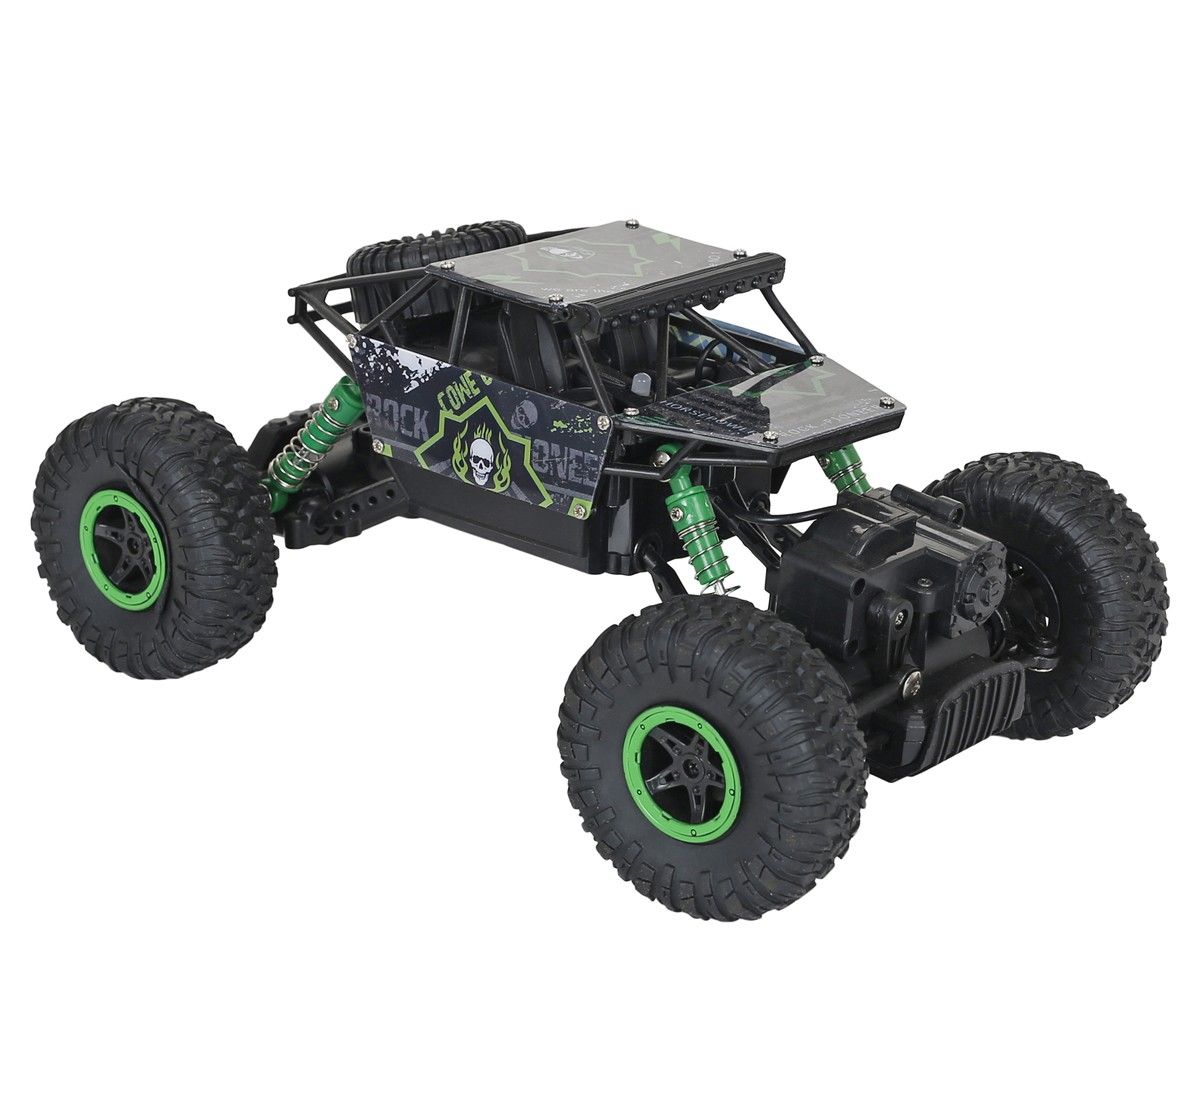 Rock Leader Battle of 2.4 GHz Full Function Climbing 4 Wheel Drive Remote Control, Green& Black